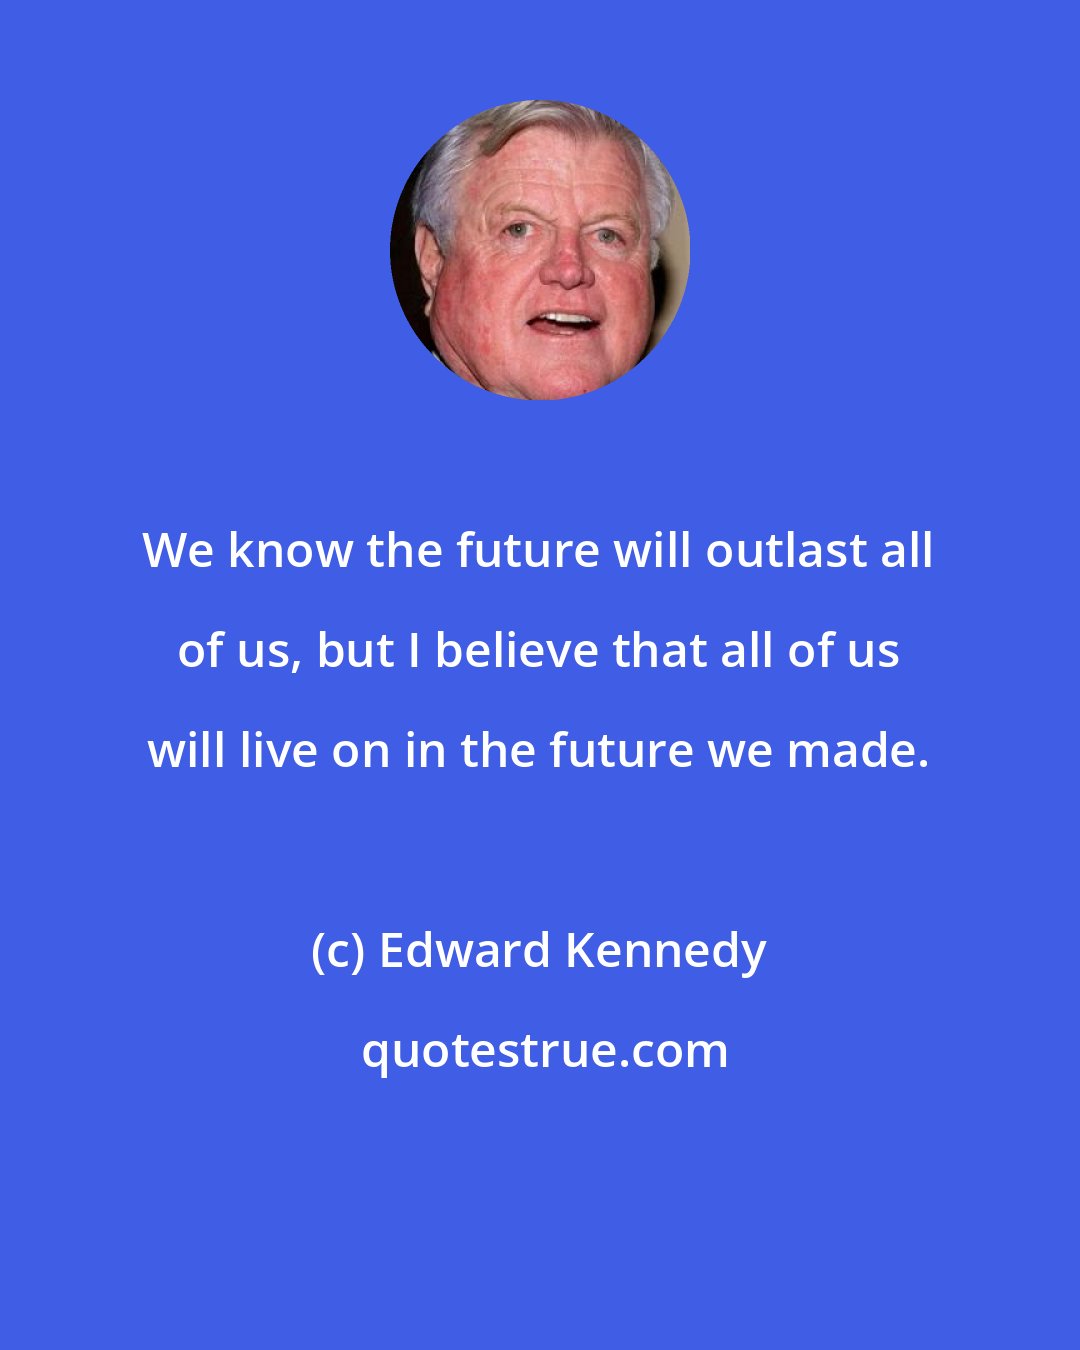 Edward Kennedy: We know the future will outlast all of us, but I believe that all of us will live on in the future we made.